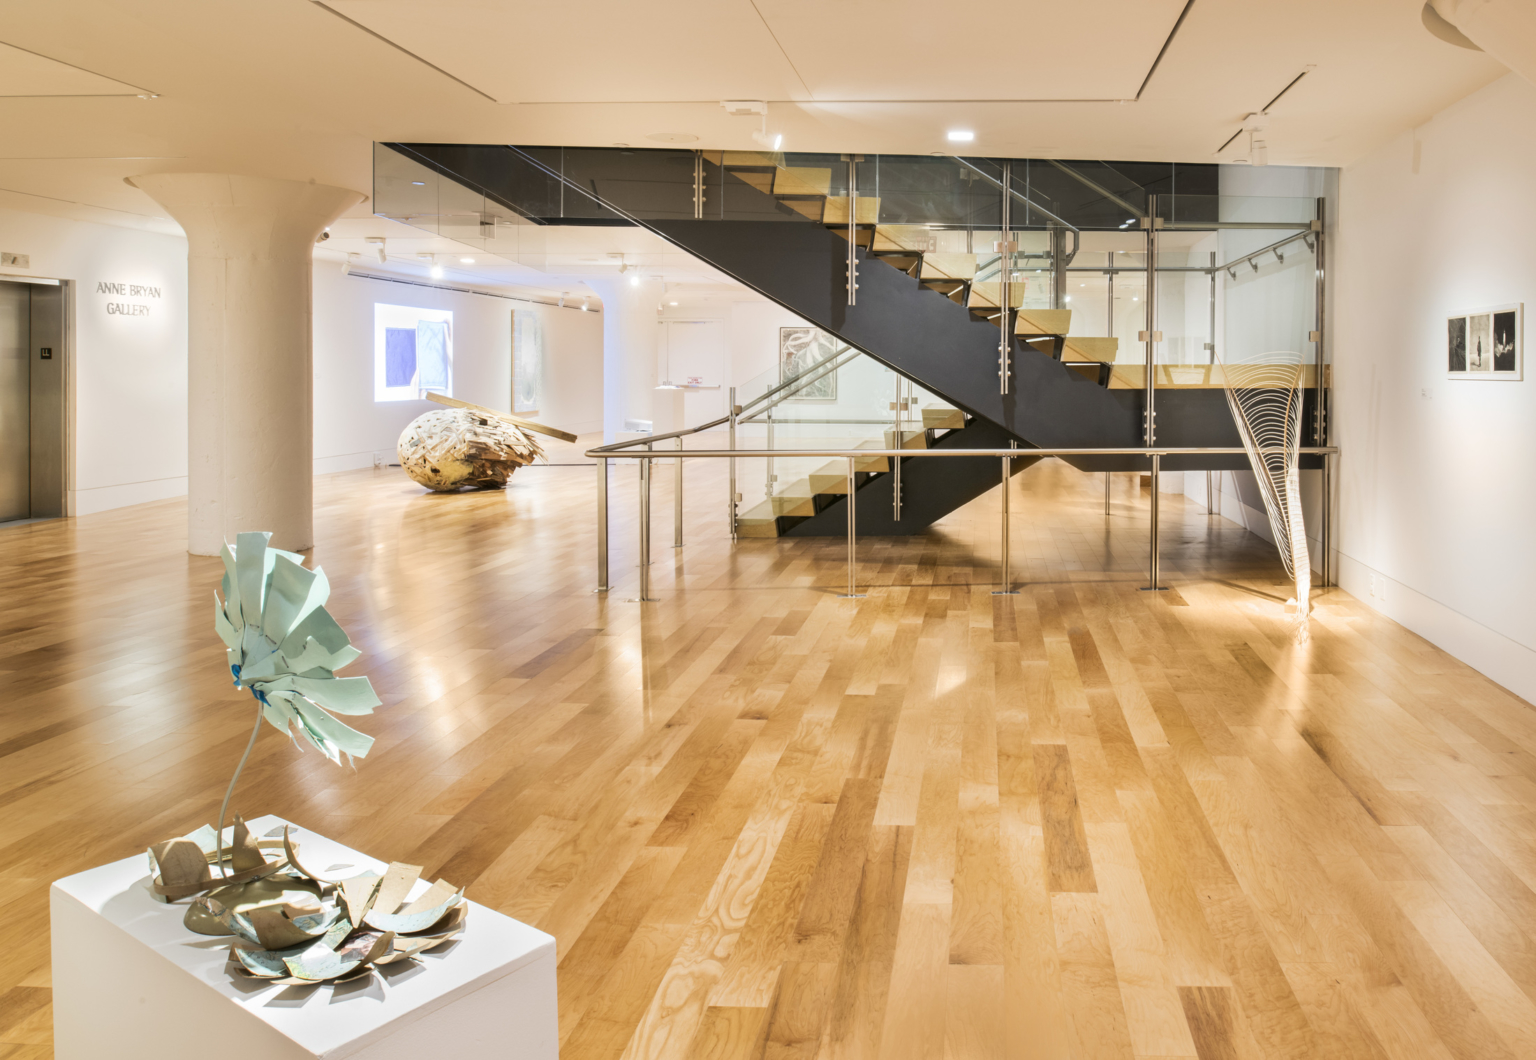 Two-story gallery with warm wood floor at Pennsylvania Academy of the Fine Arts.